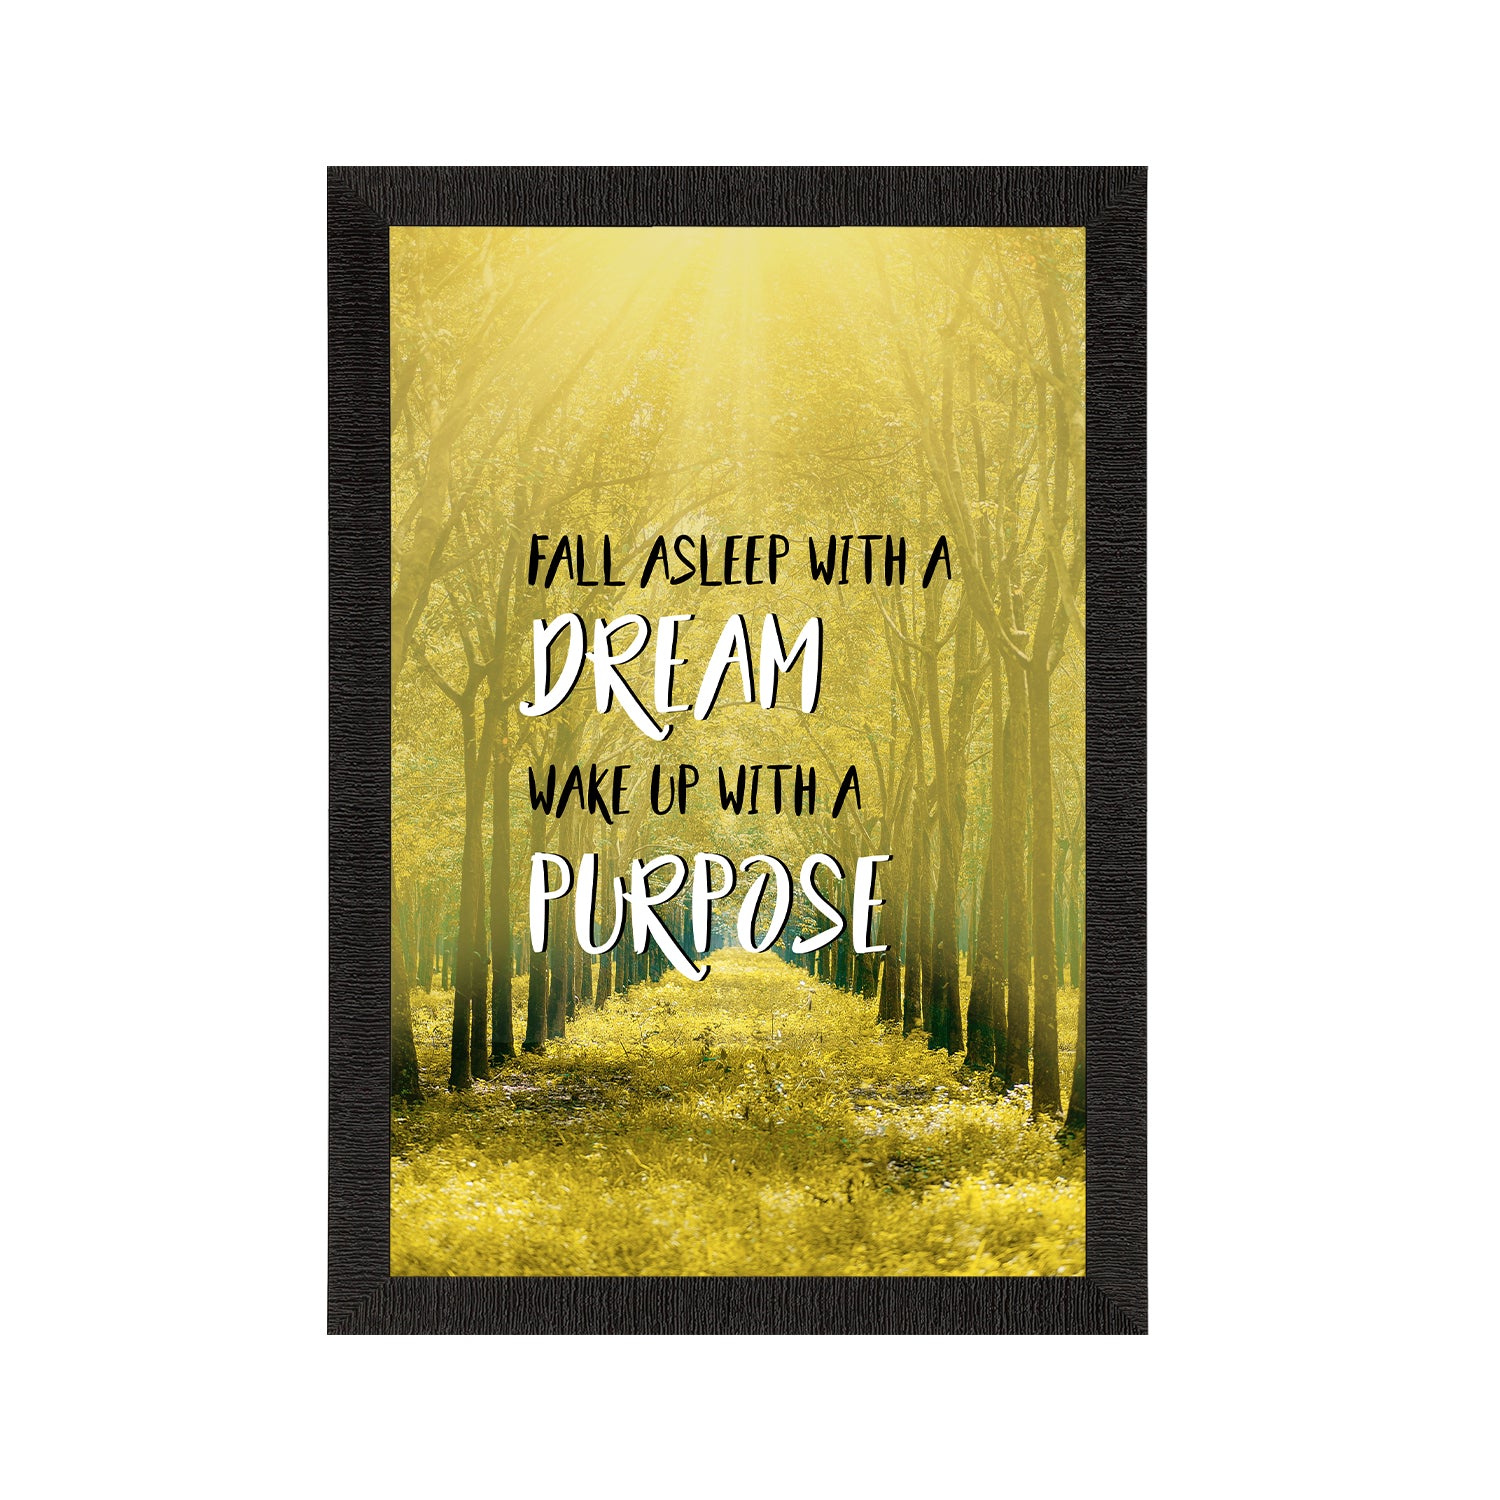 "Fall asleep with a dream wake up with a purpose" Motivational Quote Satin Matt Texture UV Art Painting